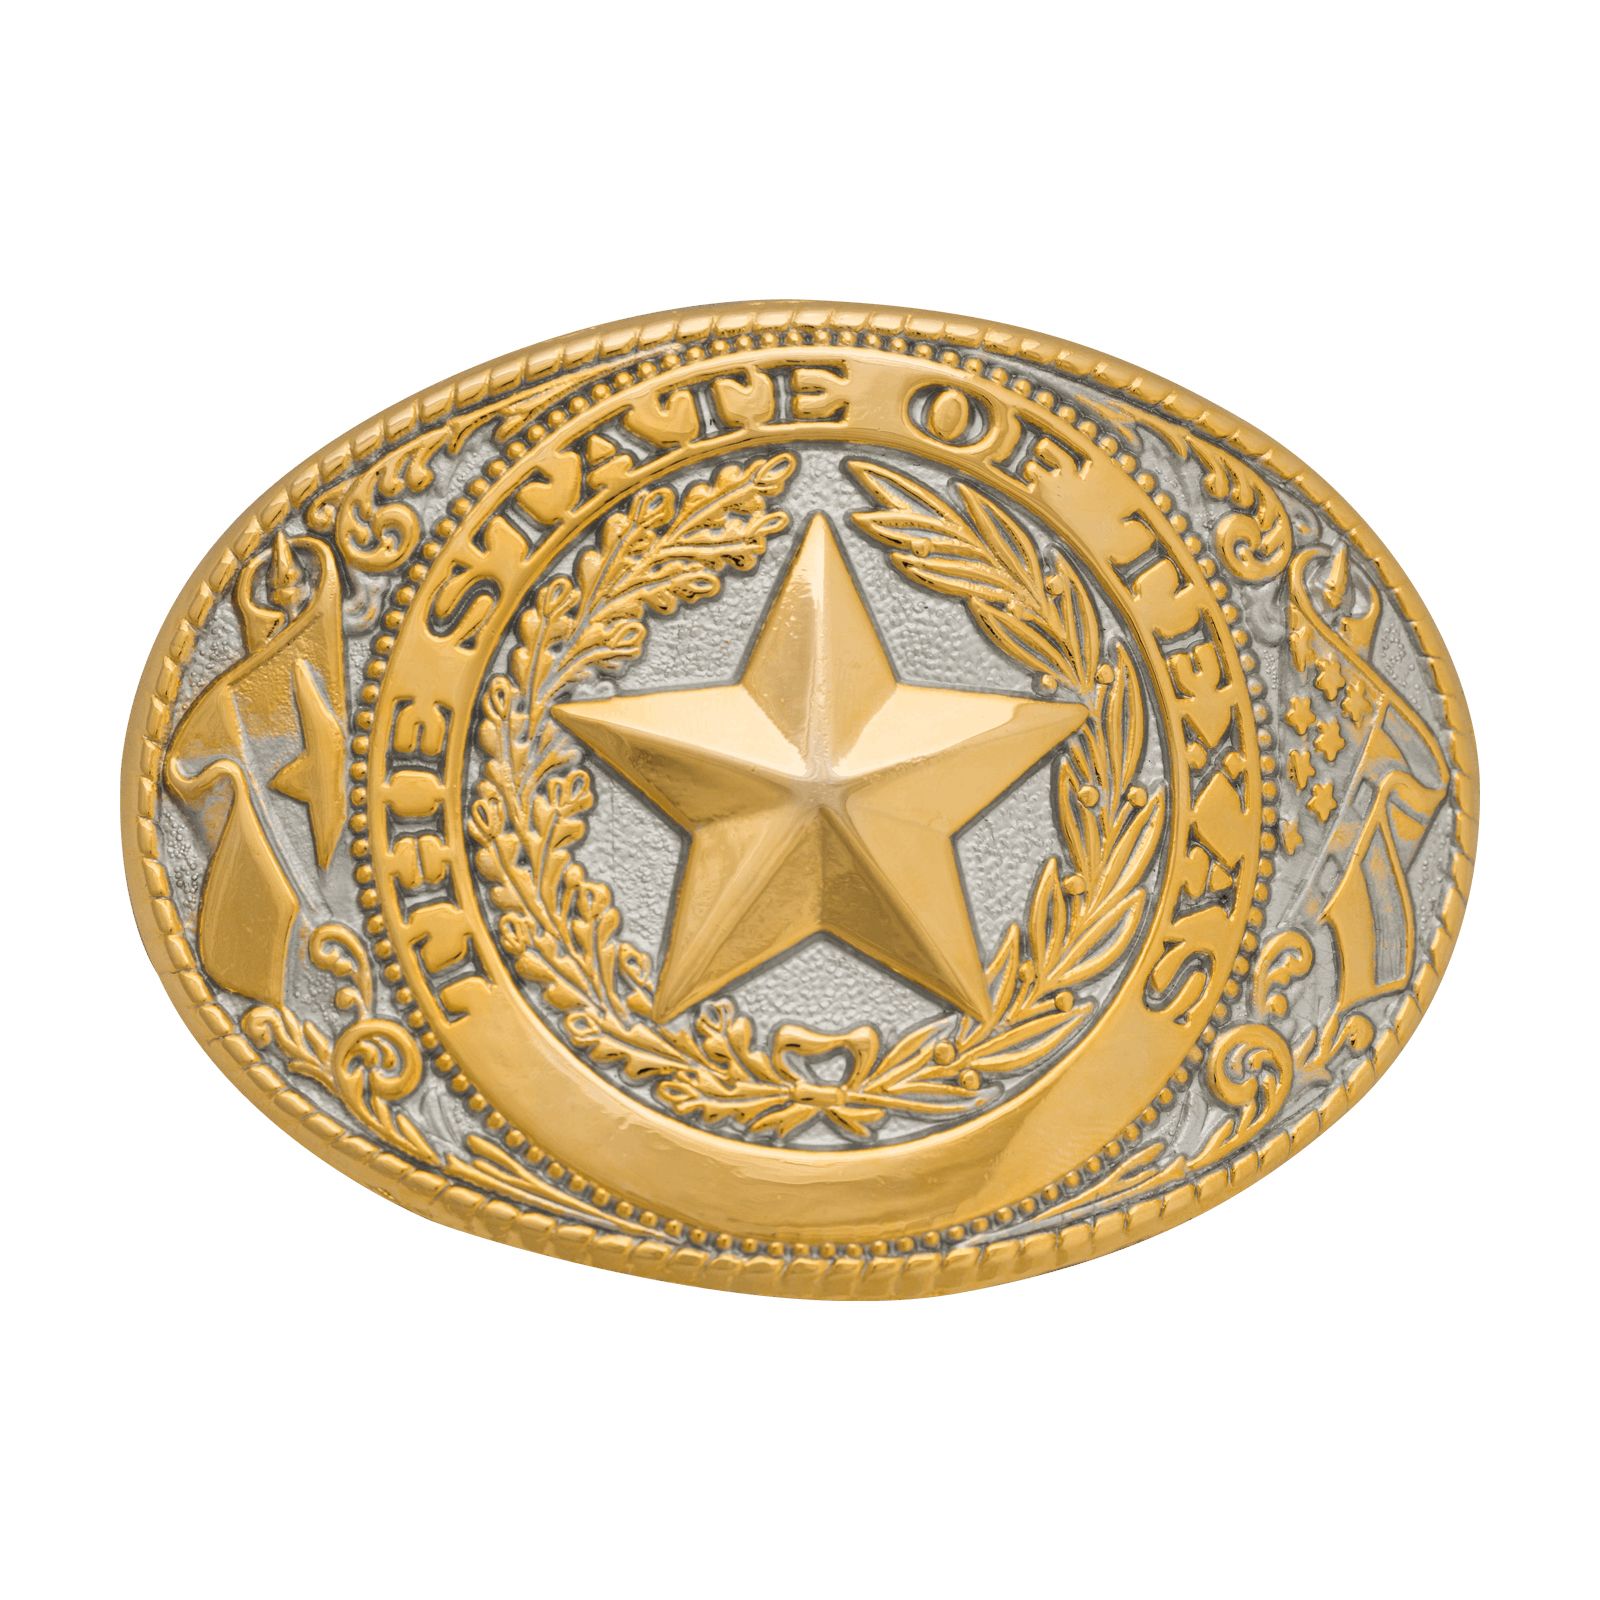 Texas State Seal Belt Buckle Oval Standard Size Silver-tone Finish 